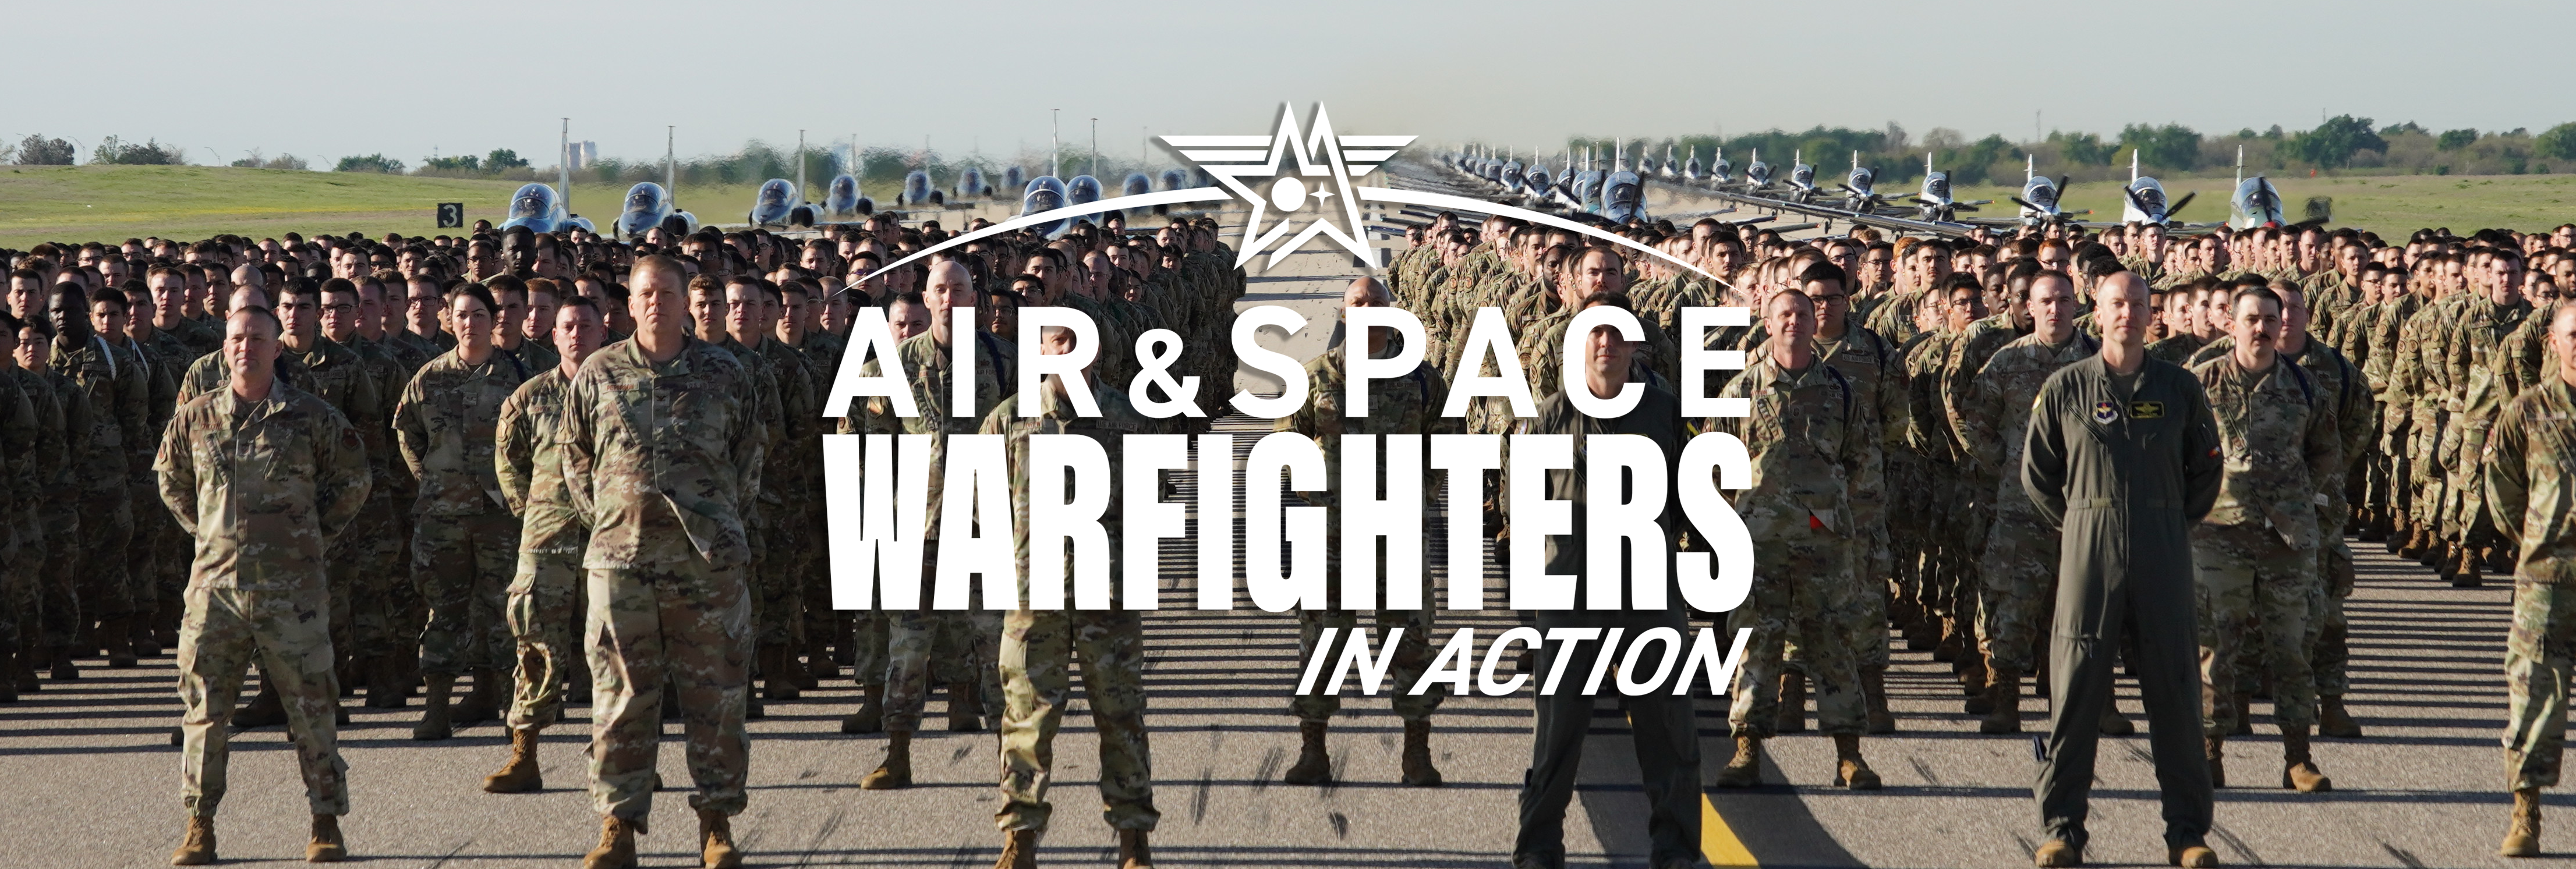 Air & Space Warfighters in Action